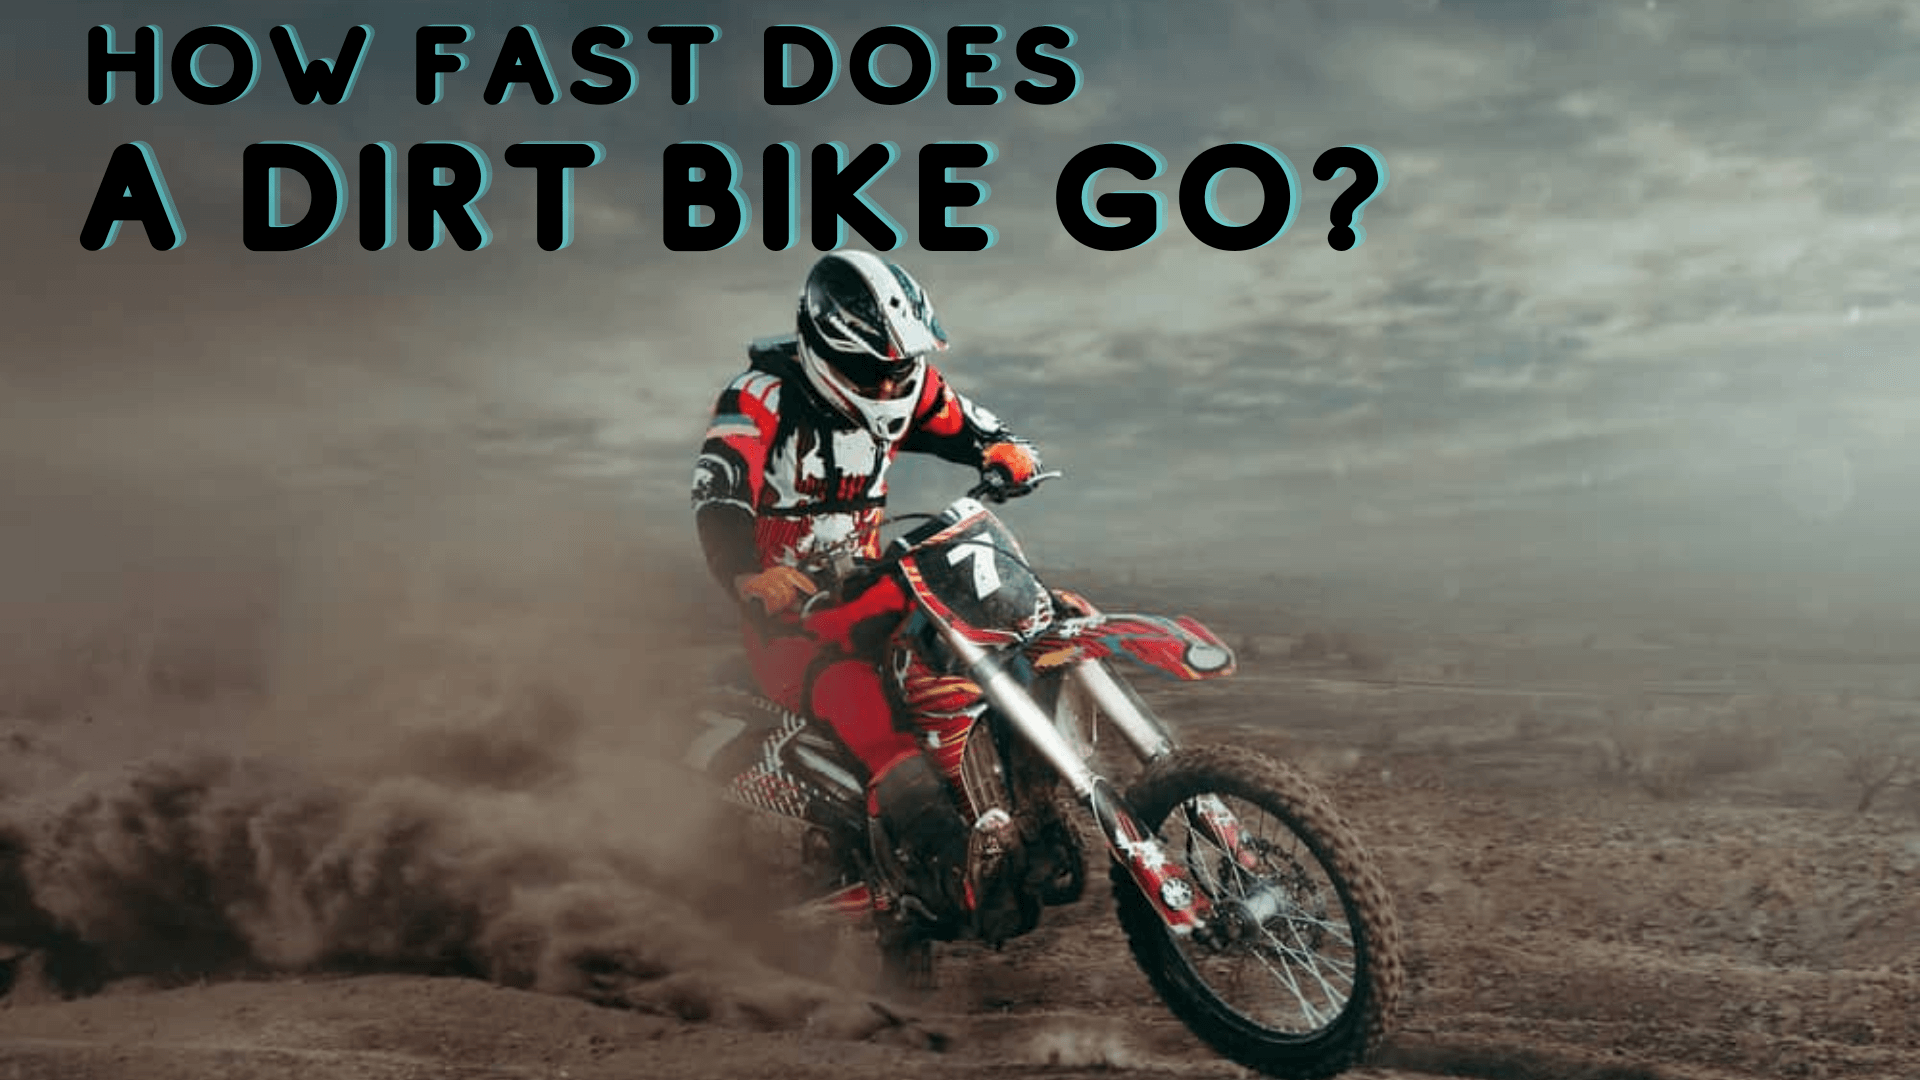 How Fast Does a Dirt Bike Go?